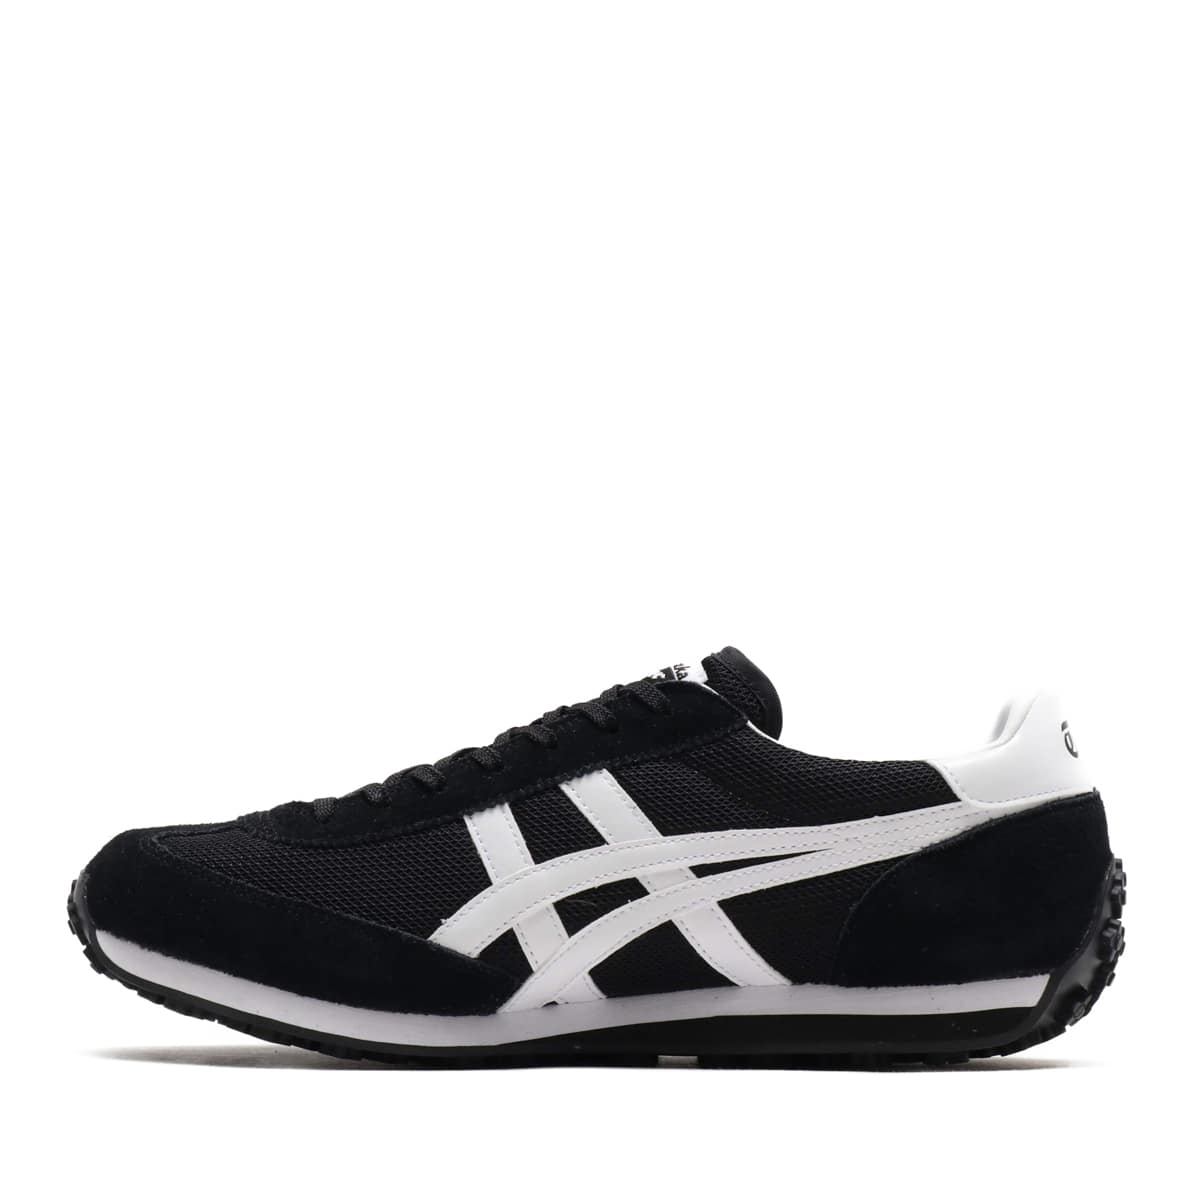 onitsuka tiger shoes black and white